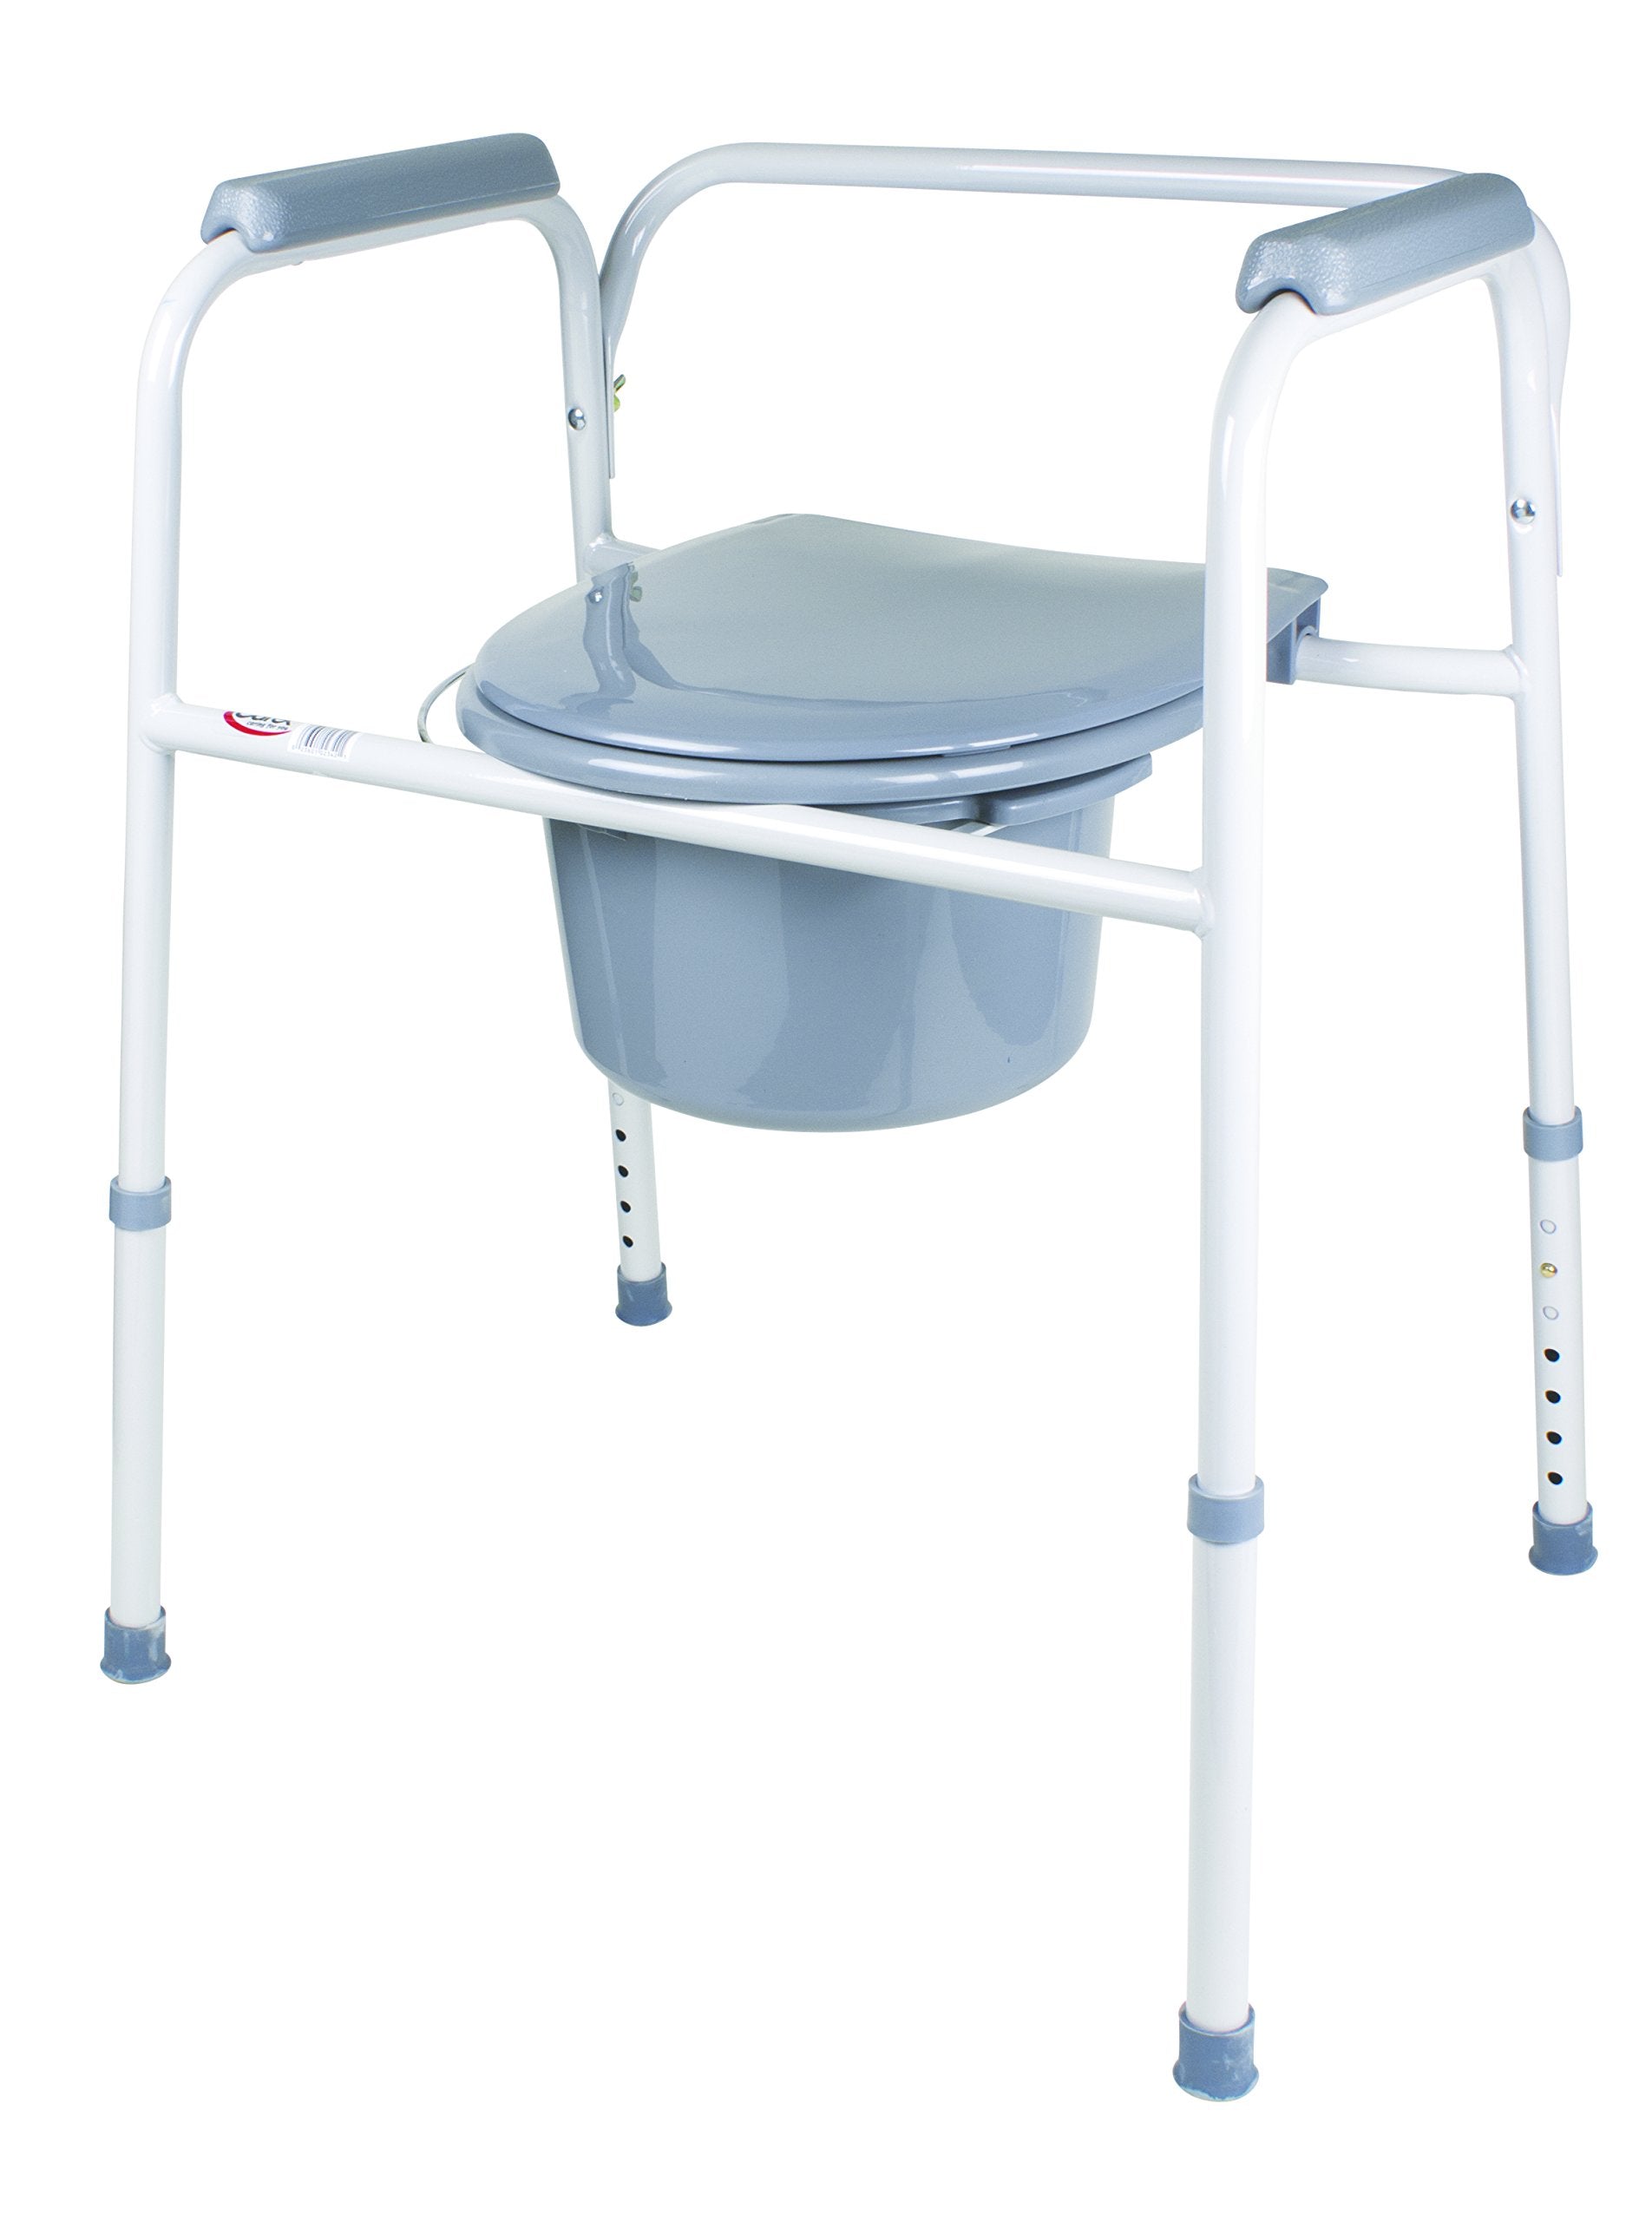 Carex Steel Commode Chair - Portable Bathroom Toilet for Elderly, Handicap, and Beside Toilet Users - 3 in 1 Commode Chair